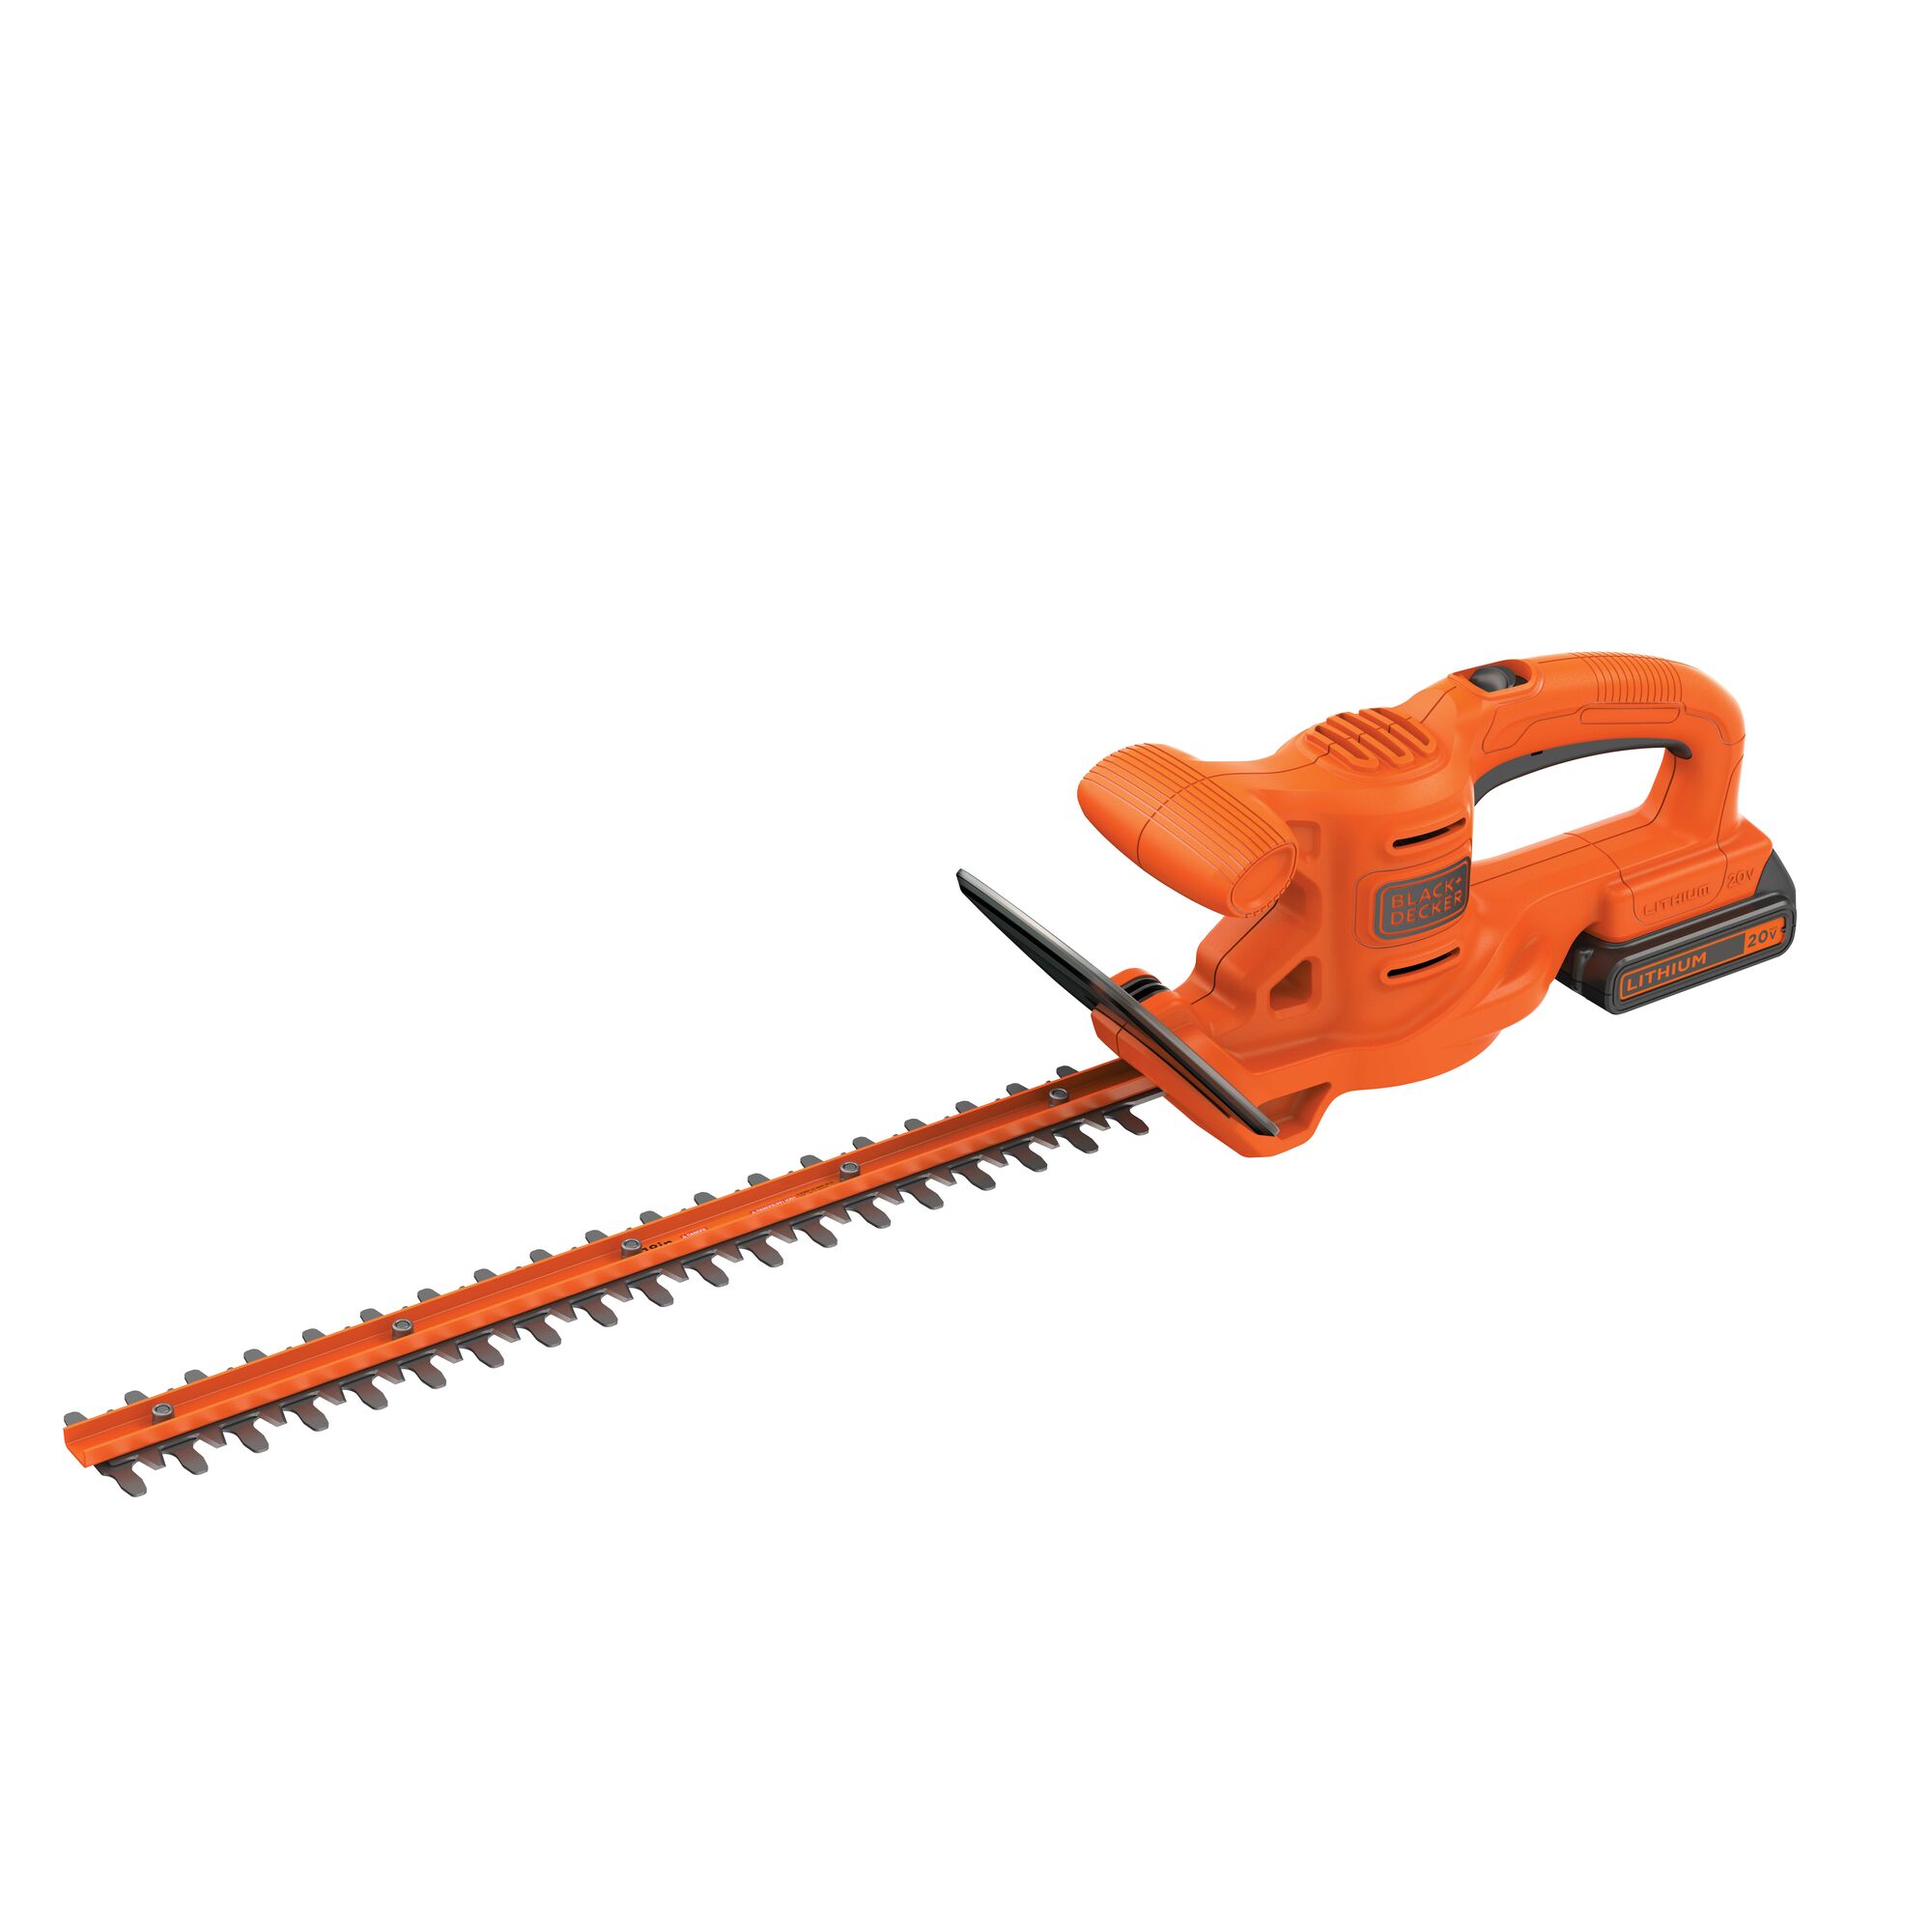 Profile of 20 volt 18 inch cordless hedge trimmer.